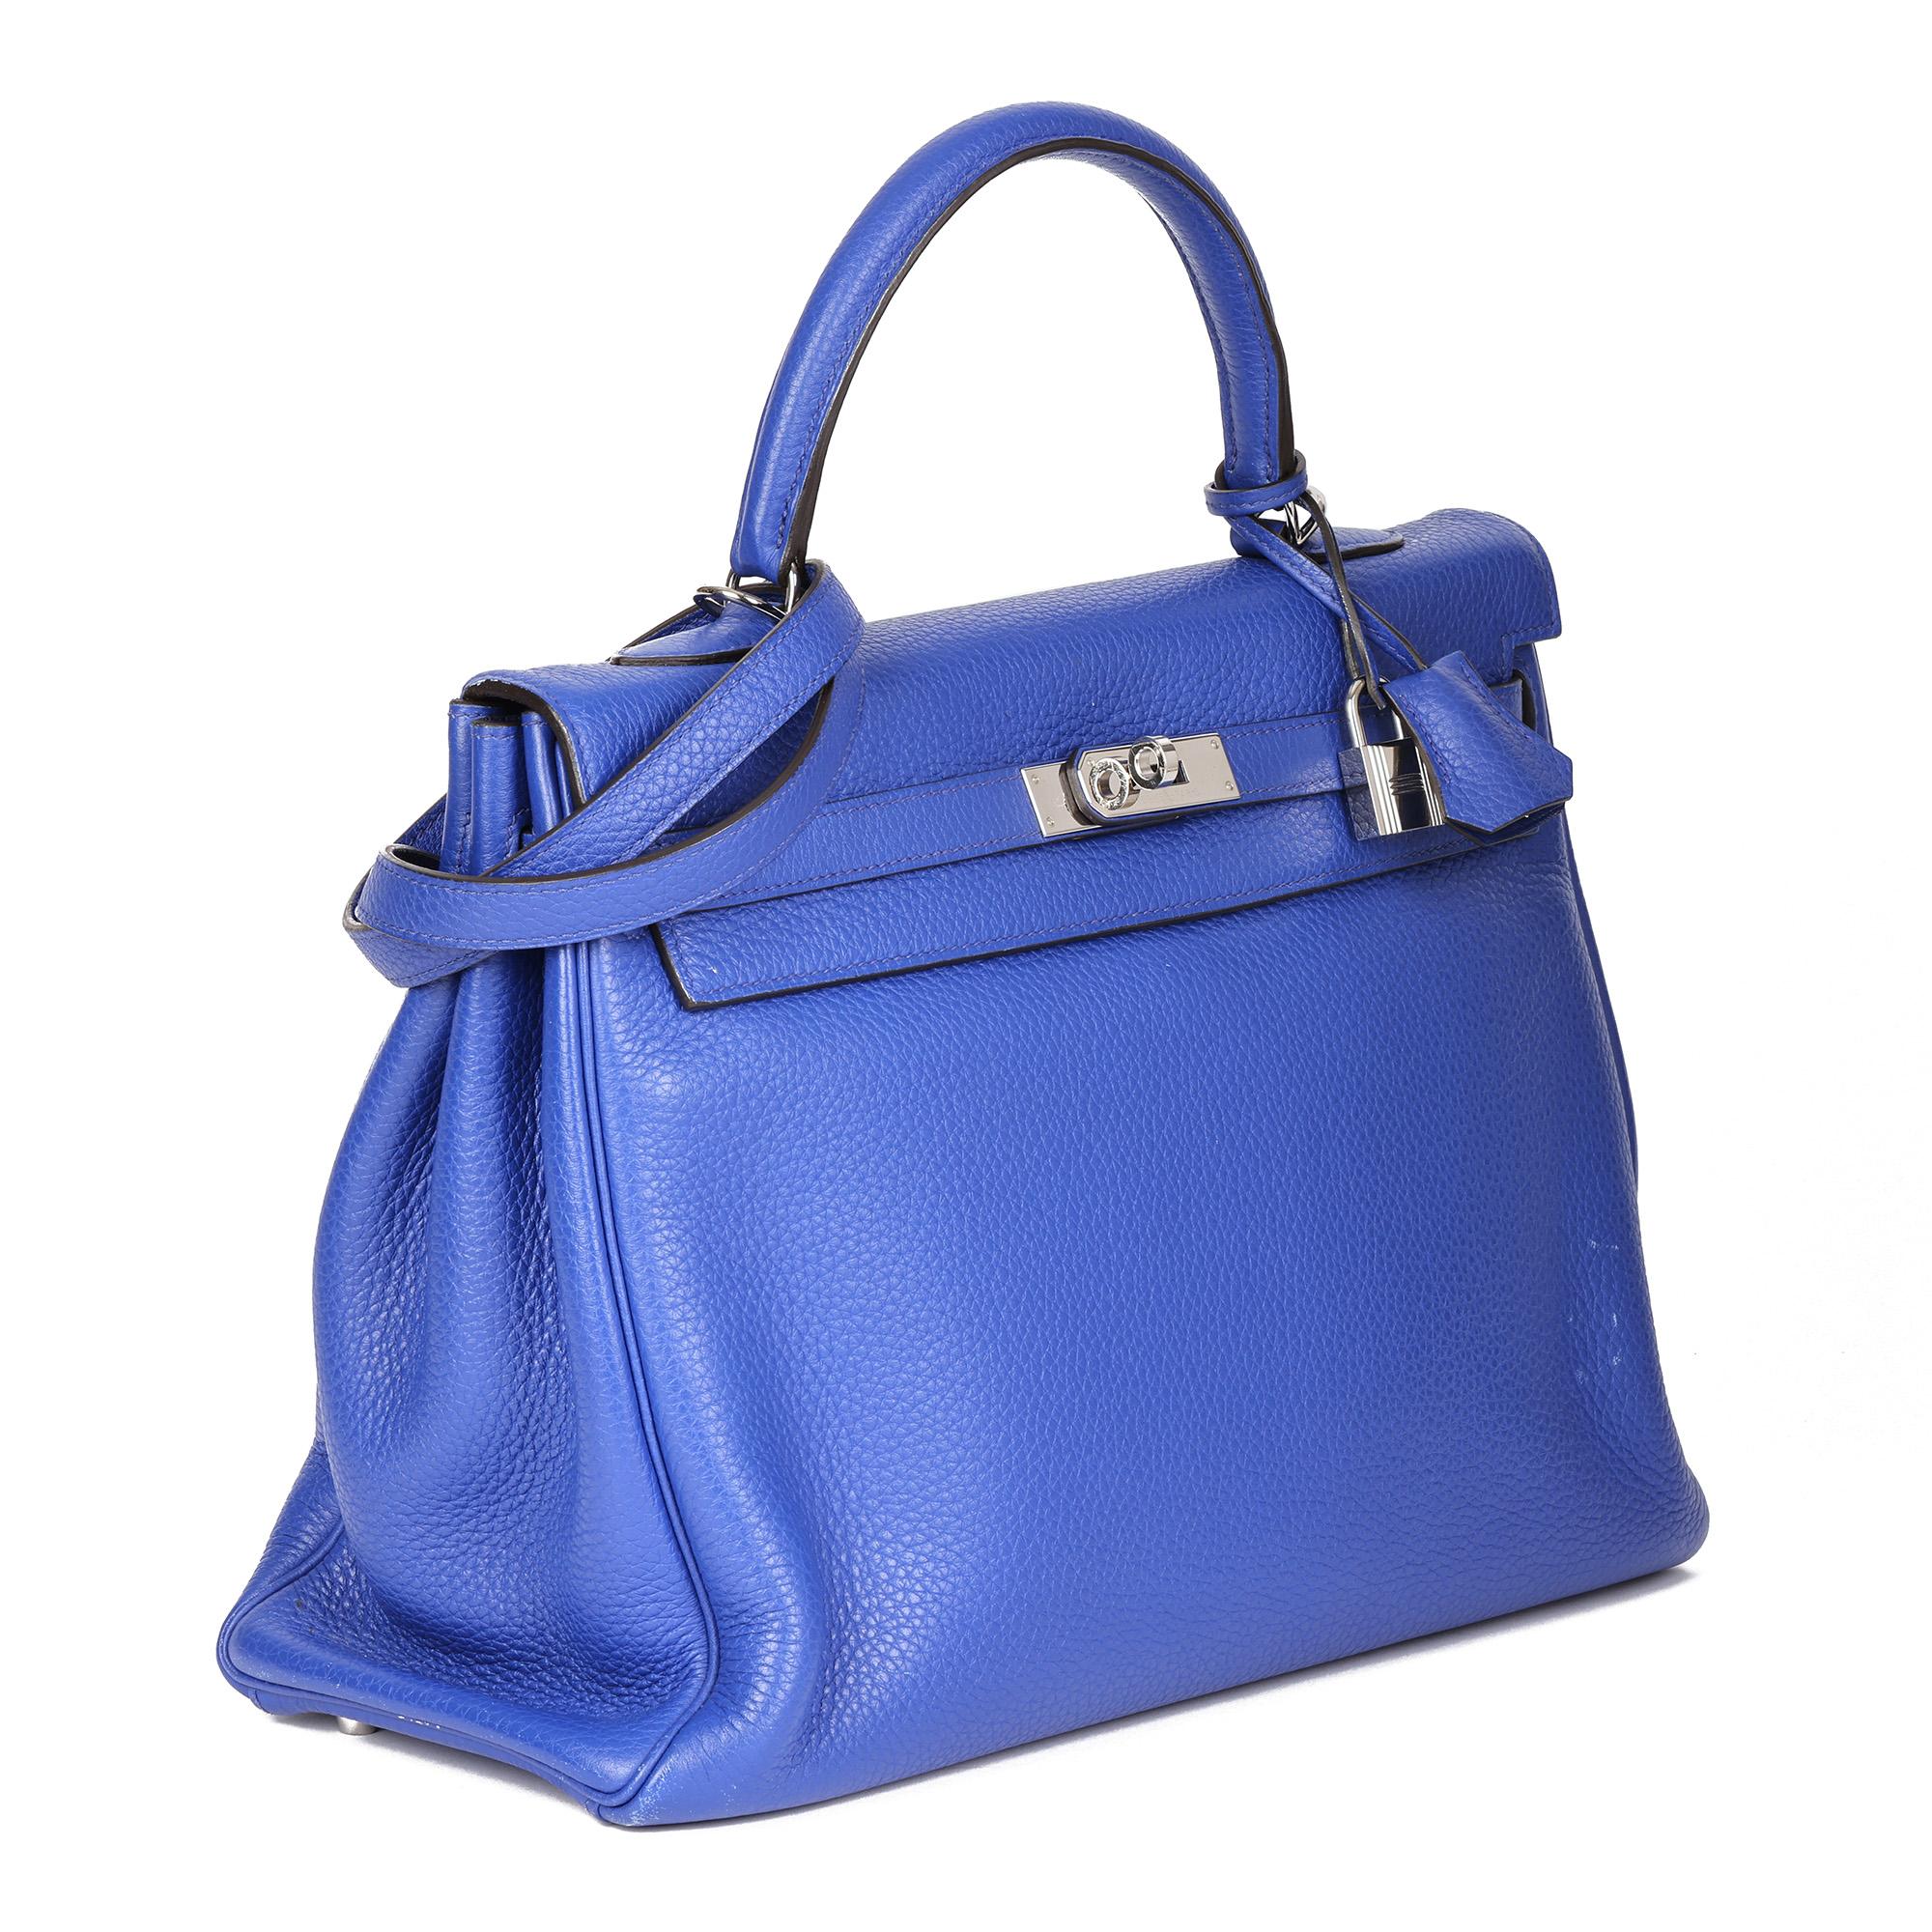 HERMÈS
Blue Electric Clemence Leather Kelly 35cm Retourne

Serial Number: [O]
Age (Circa): 2011
Accompanied By: Hermès Dust Bag, Padlock, Clochette, Keys, Shoulder Strap
Authenticity Details: Date Stamp (Made in France)
Gender: Ladies
Type: Top